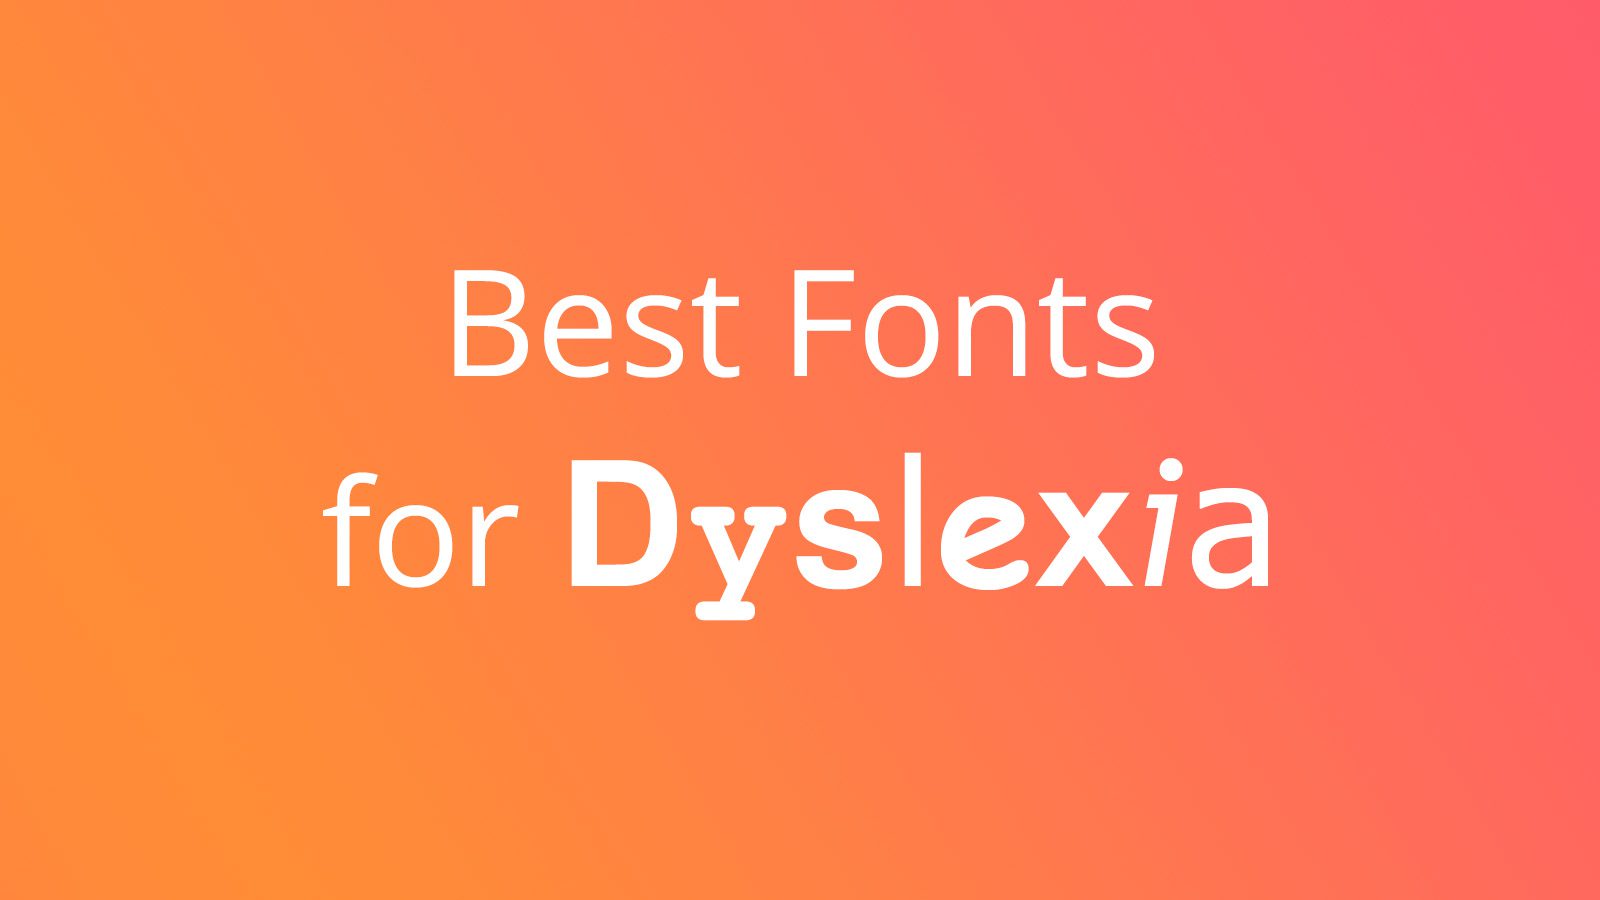 Best fonts for dyslexia.